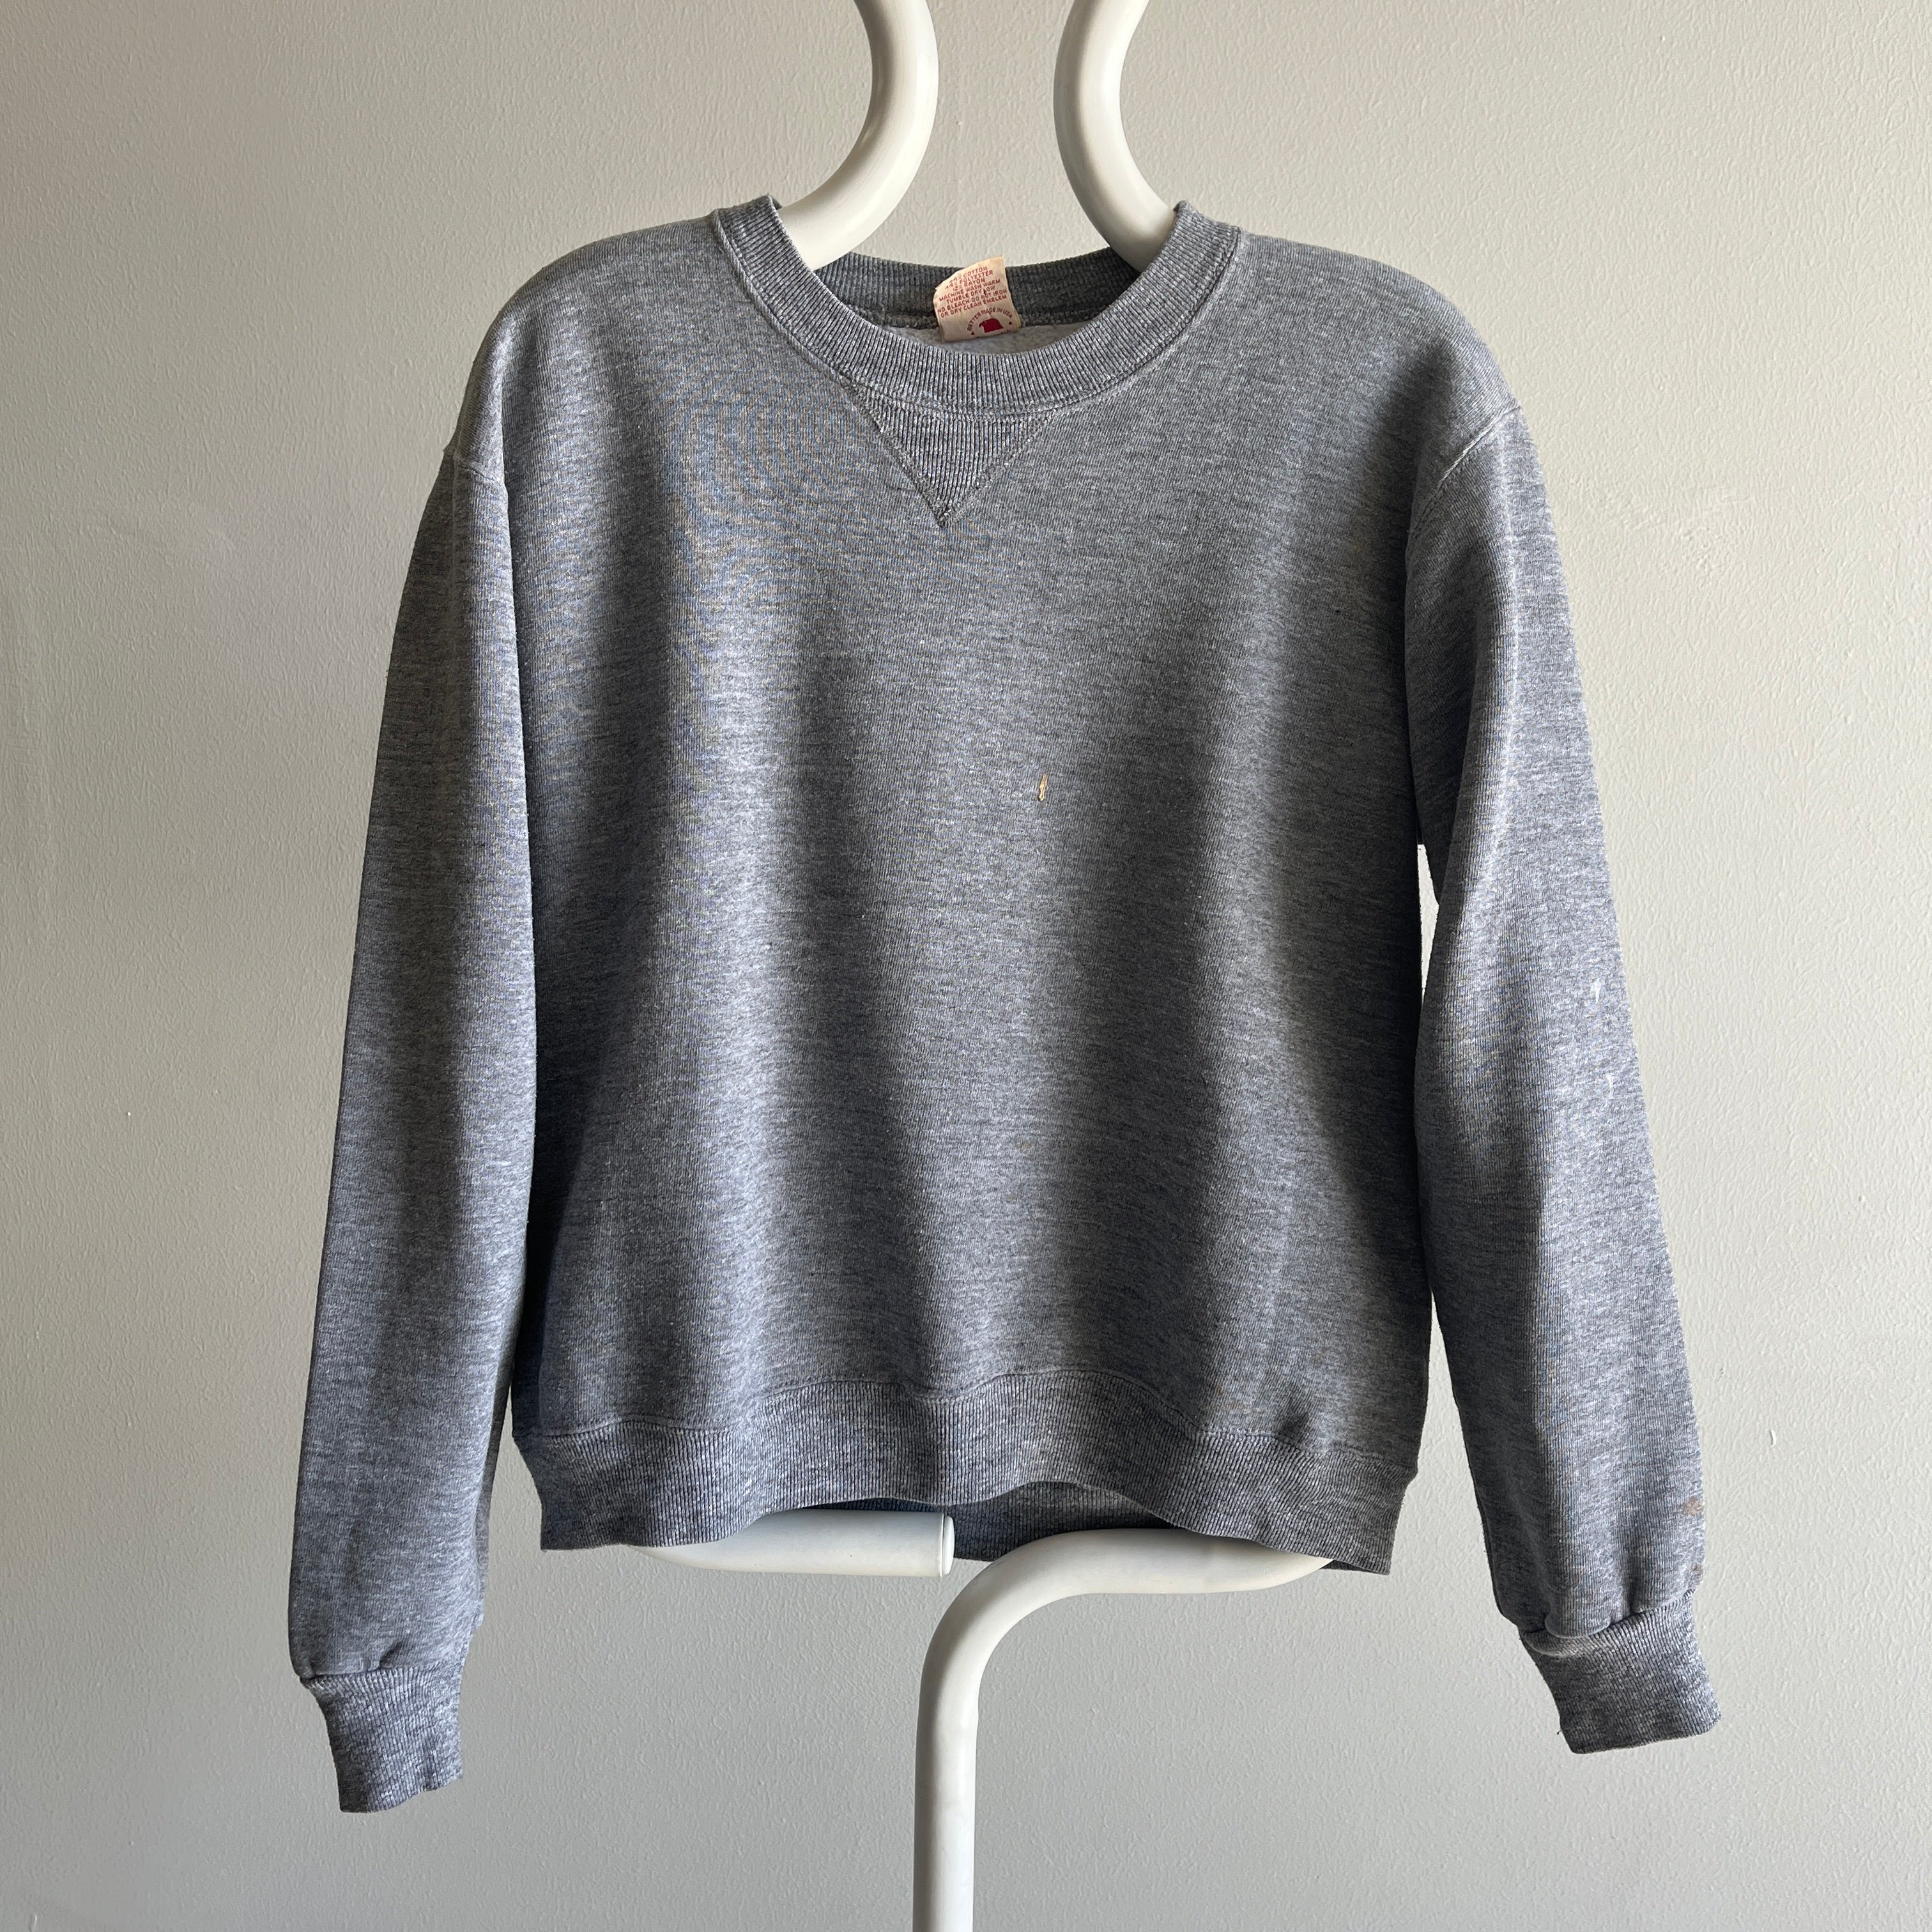 1980s Russell Brand Blank Grey Paint Stained Sweatshirt - Collection personnelle